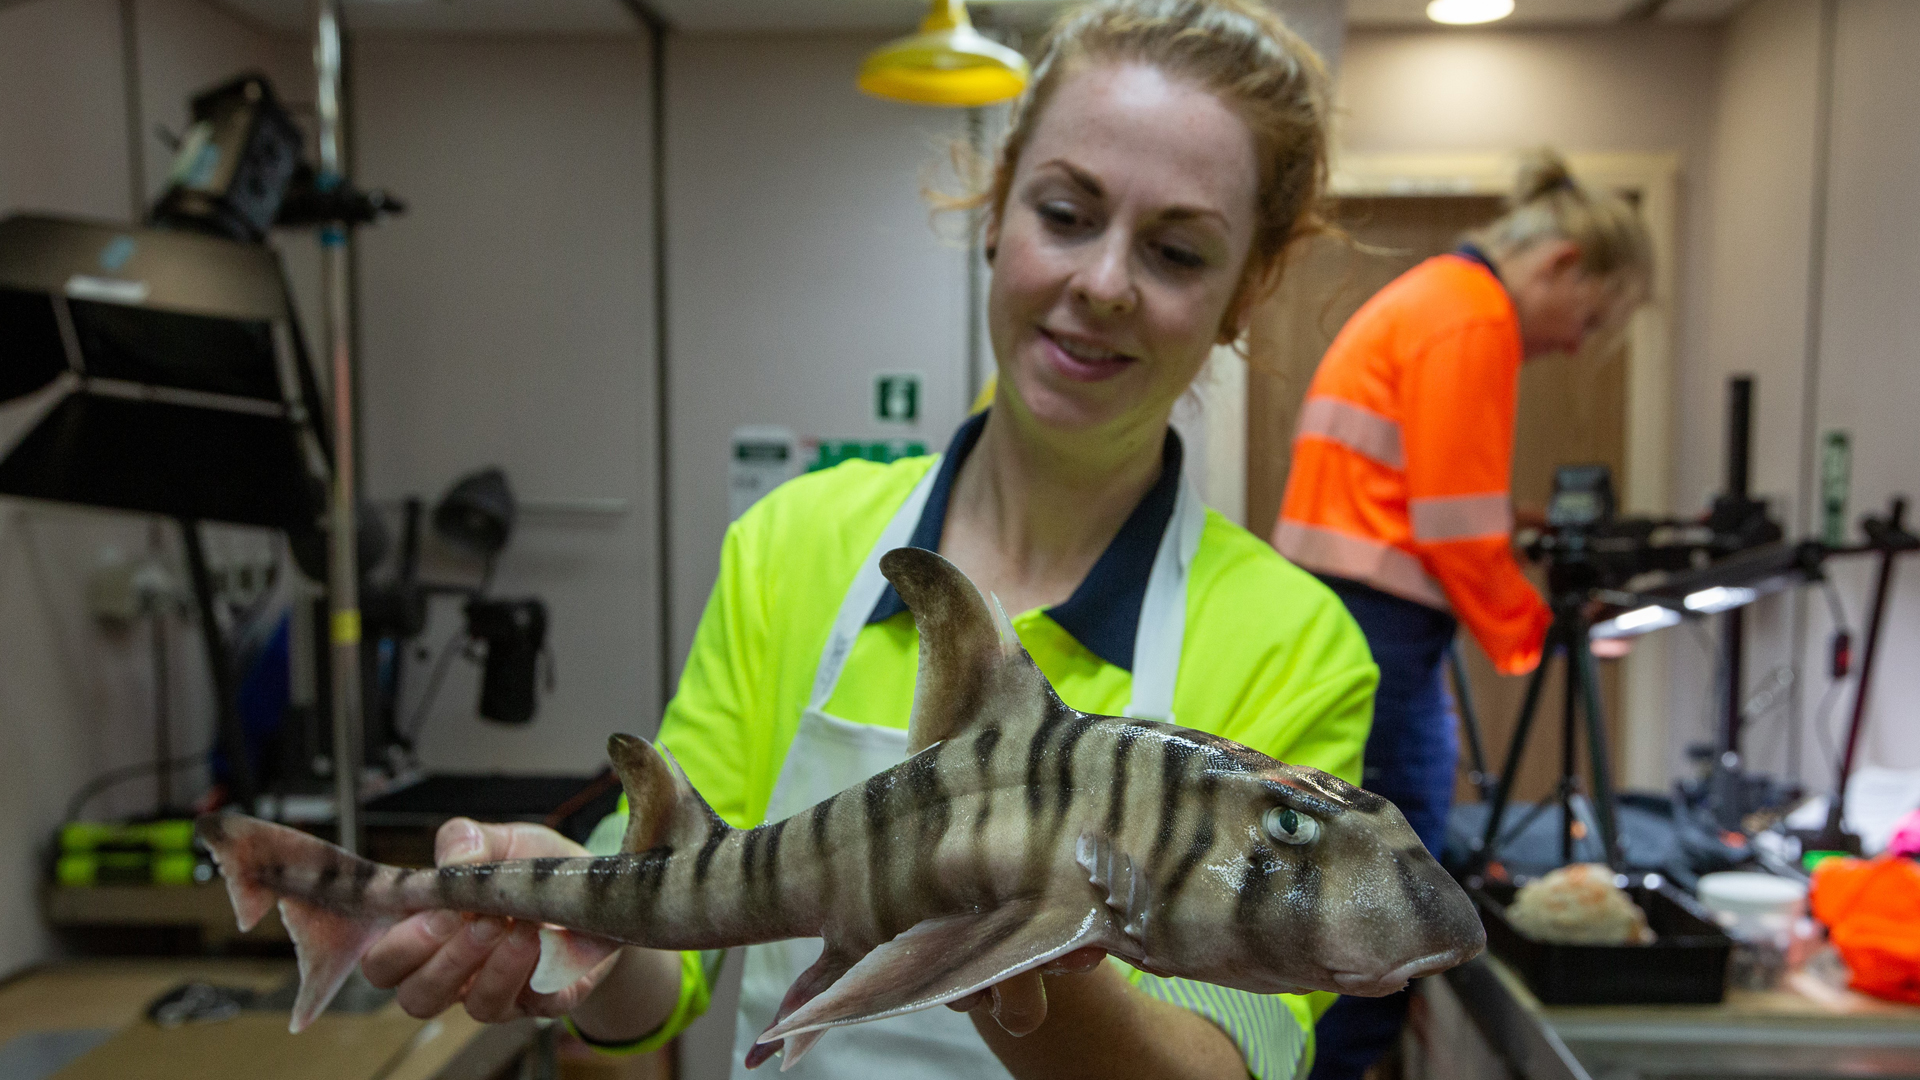 Previously Unknown Species: New Shark Discovered in Australia